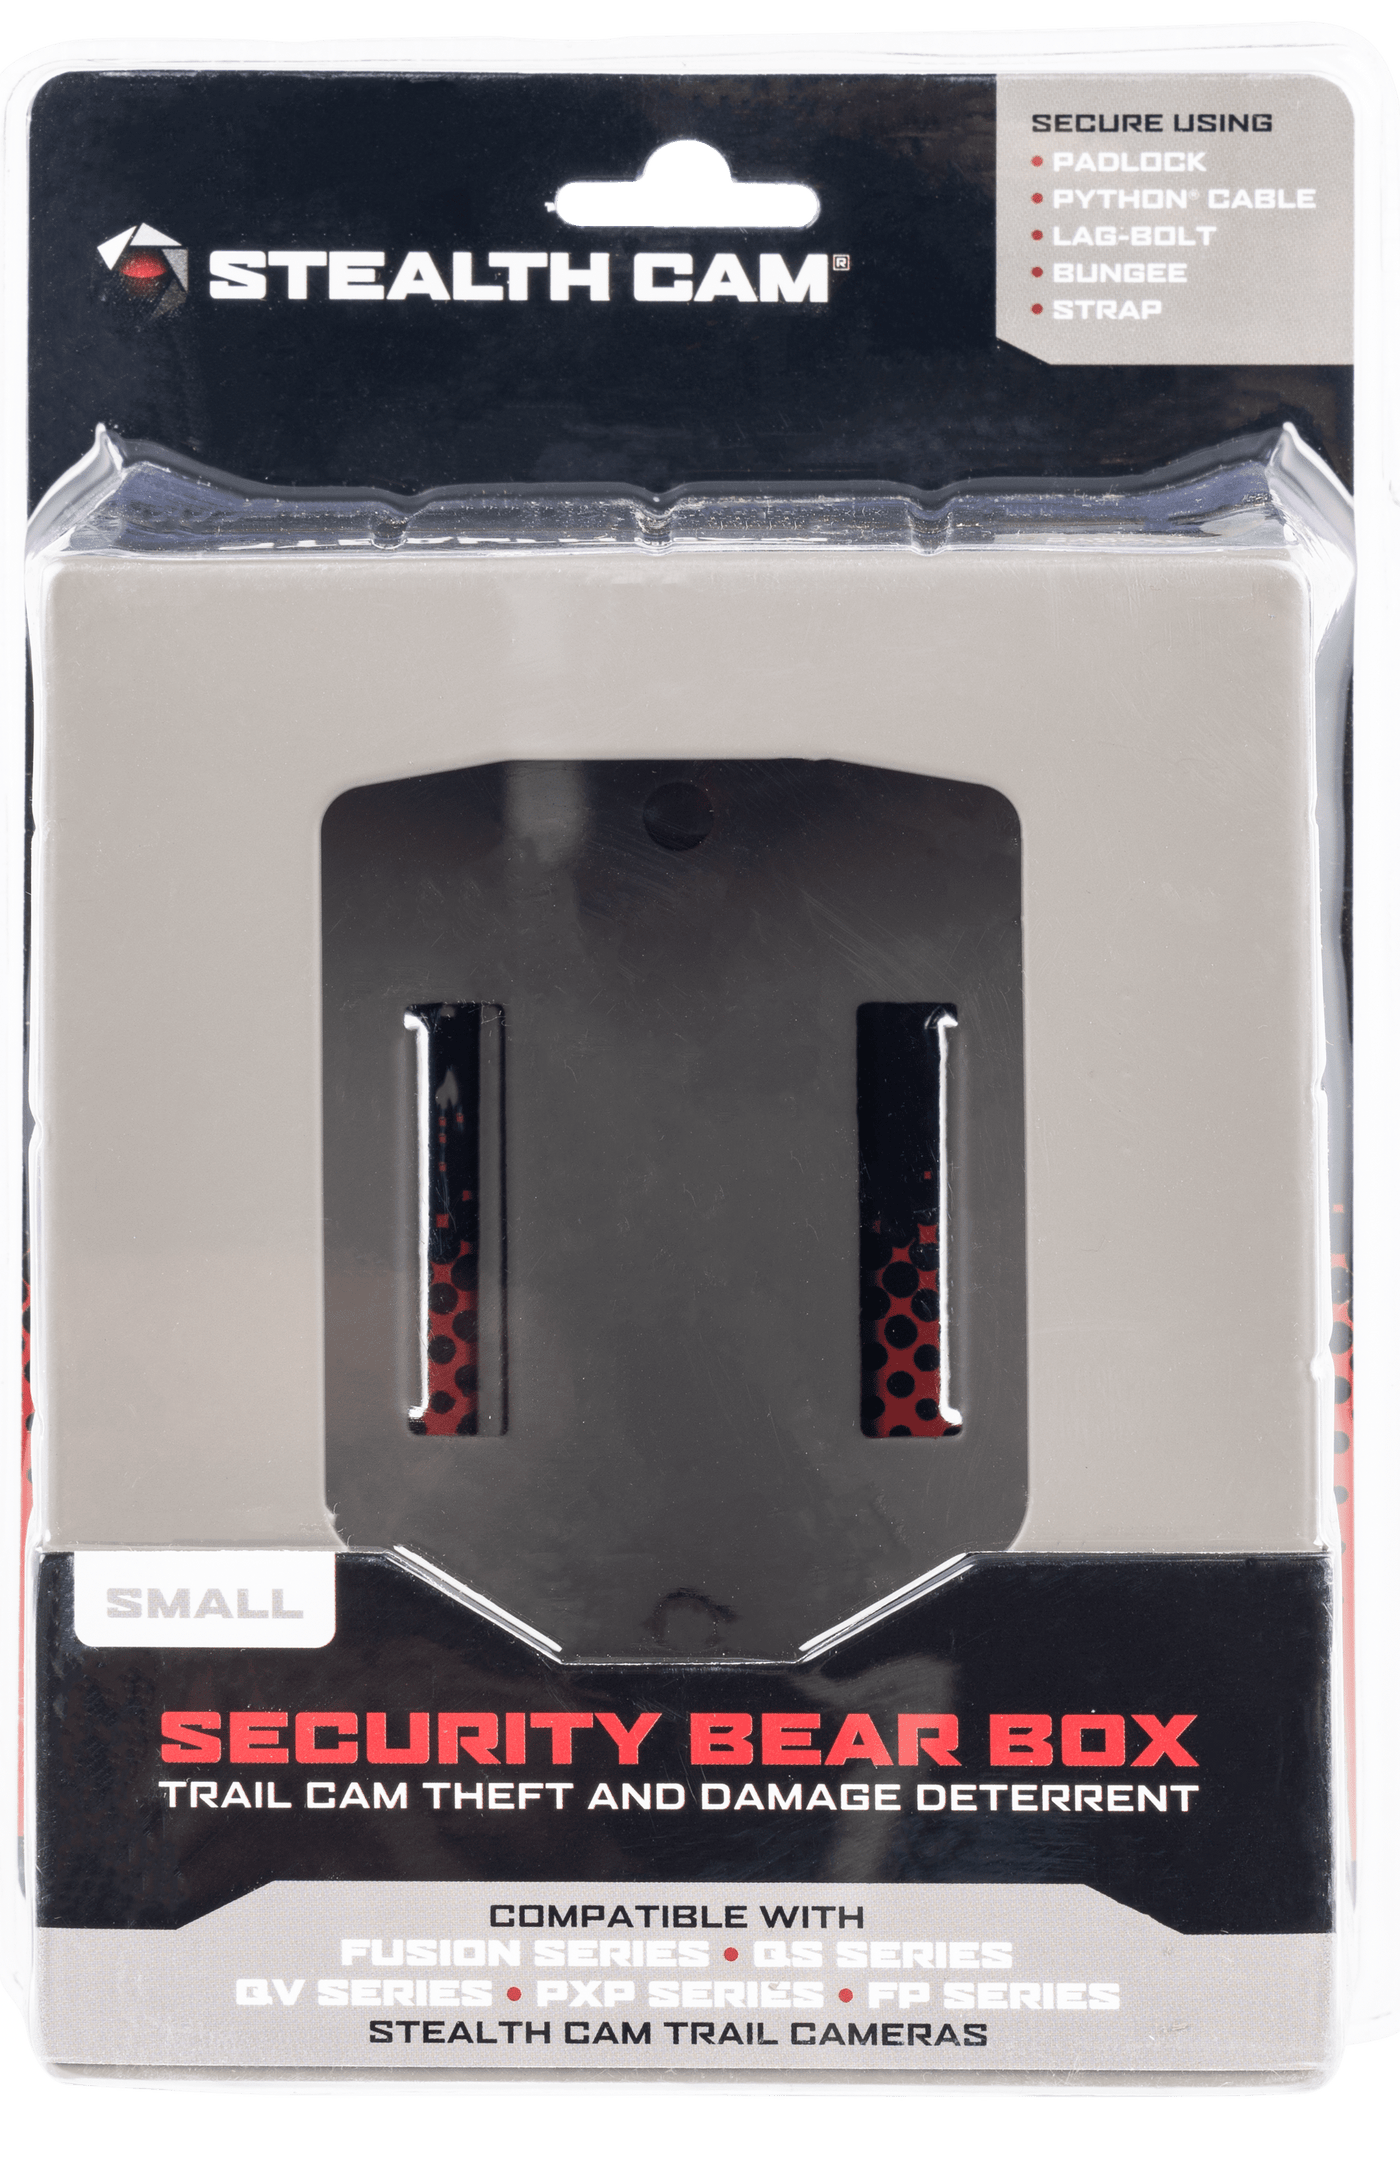 Stealth Cam Stealth Cam Security Box, Steal Stc-bb-sm     Small Security Box Qs Qv Px Hunting